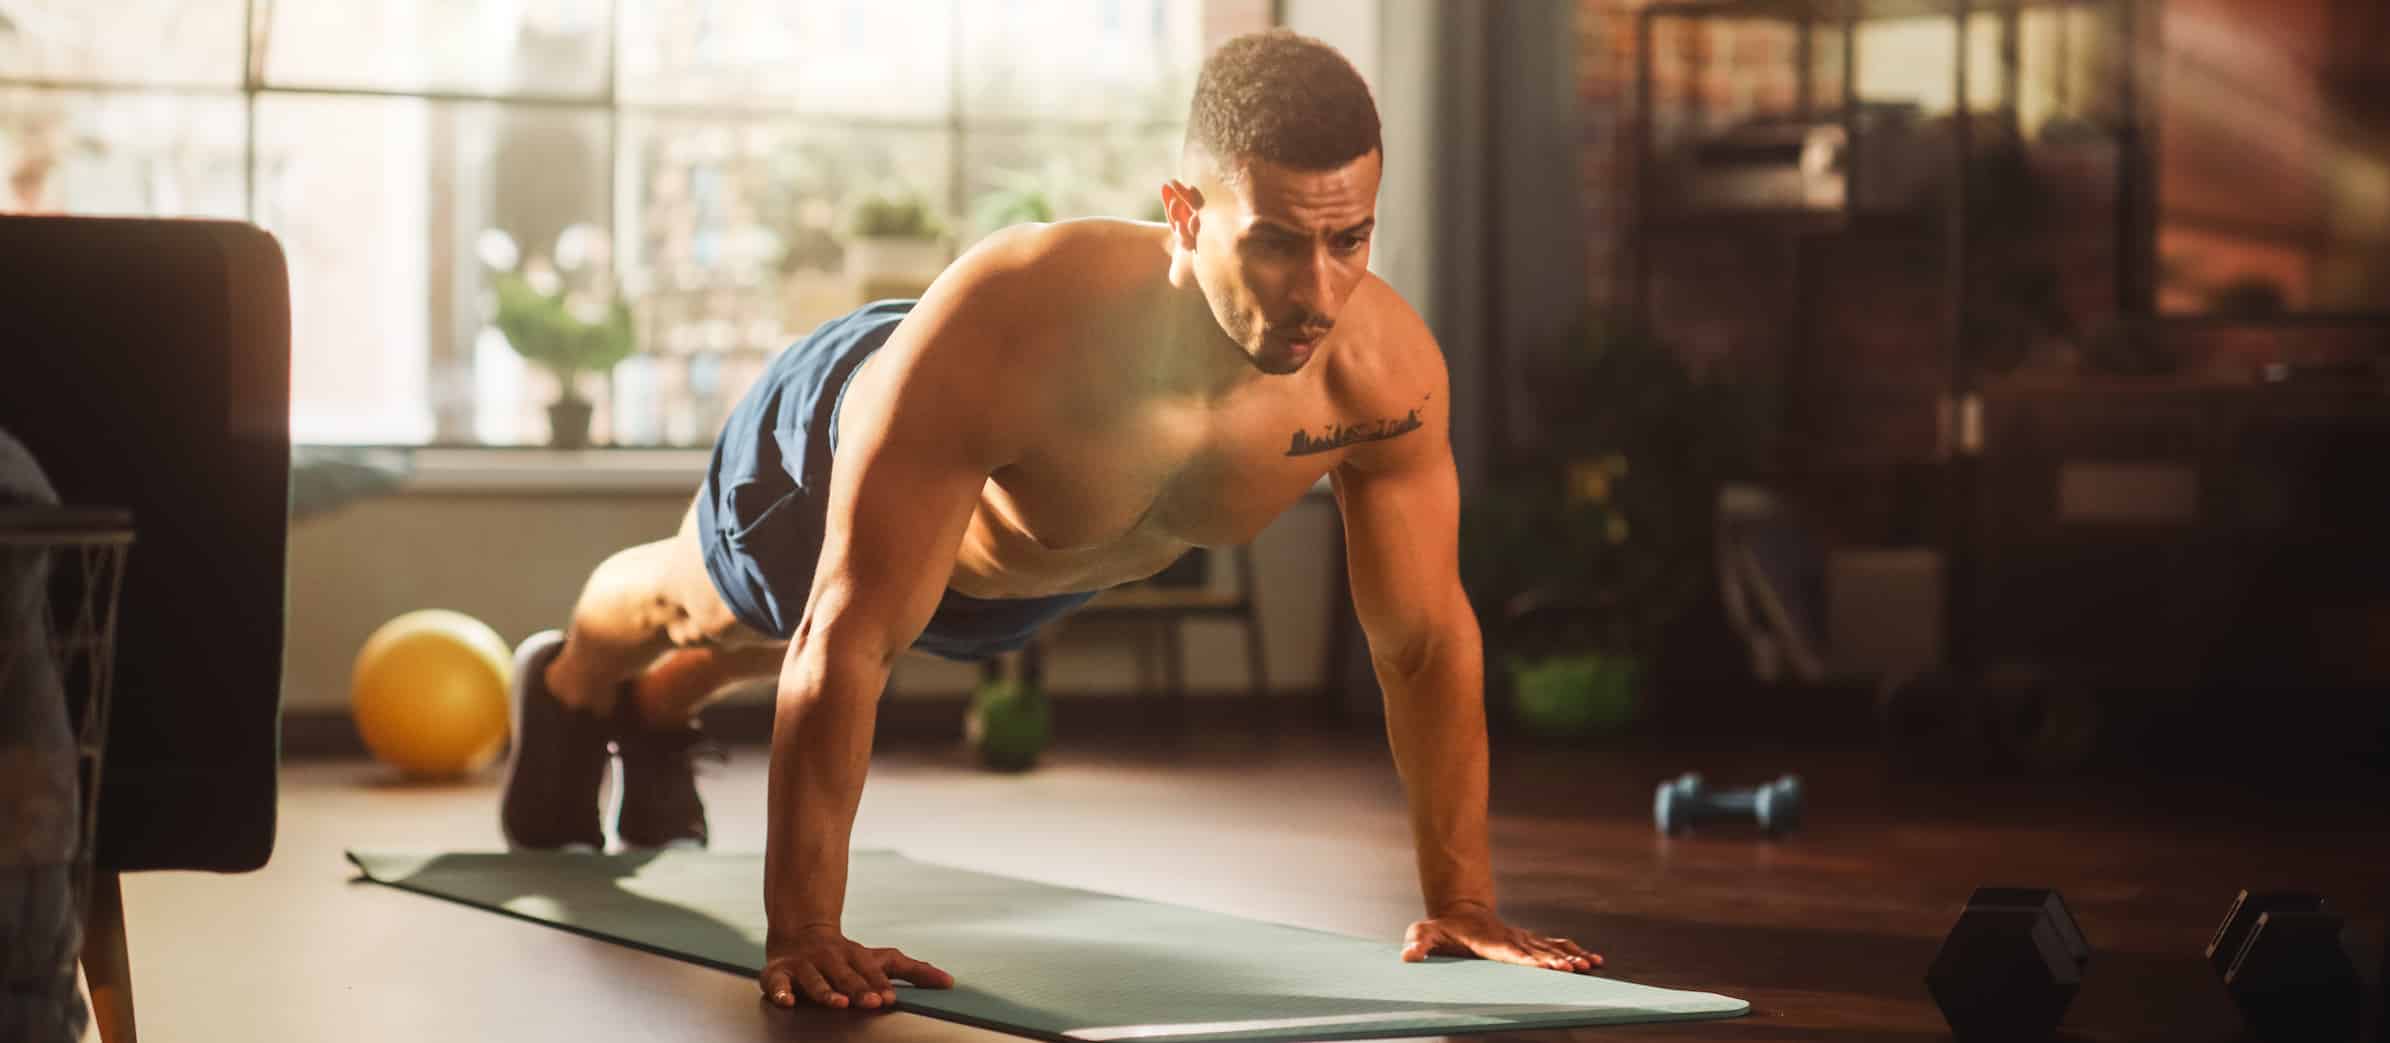 Strong athletic man does shirtless workout at home gym, doing push ups. Lean fit muscular mixed race sportsman staying healthy, training at home. Sweat and determination lead to success